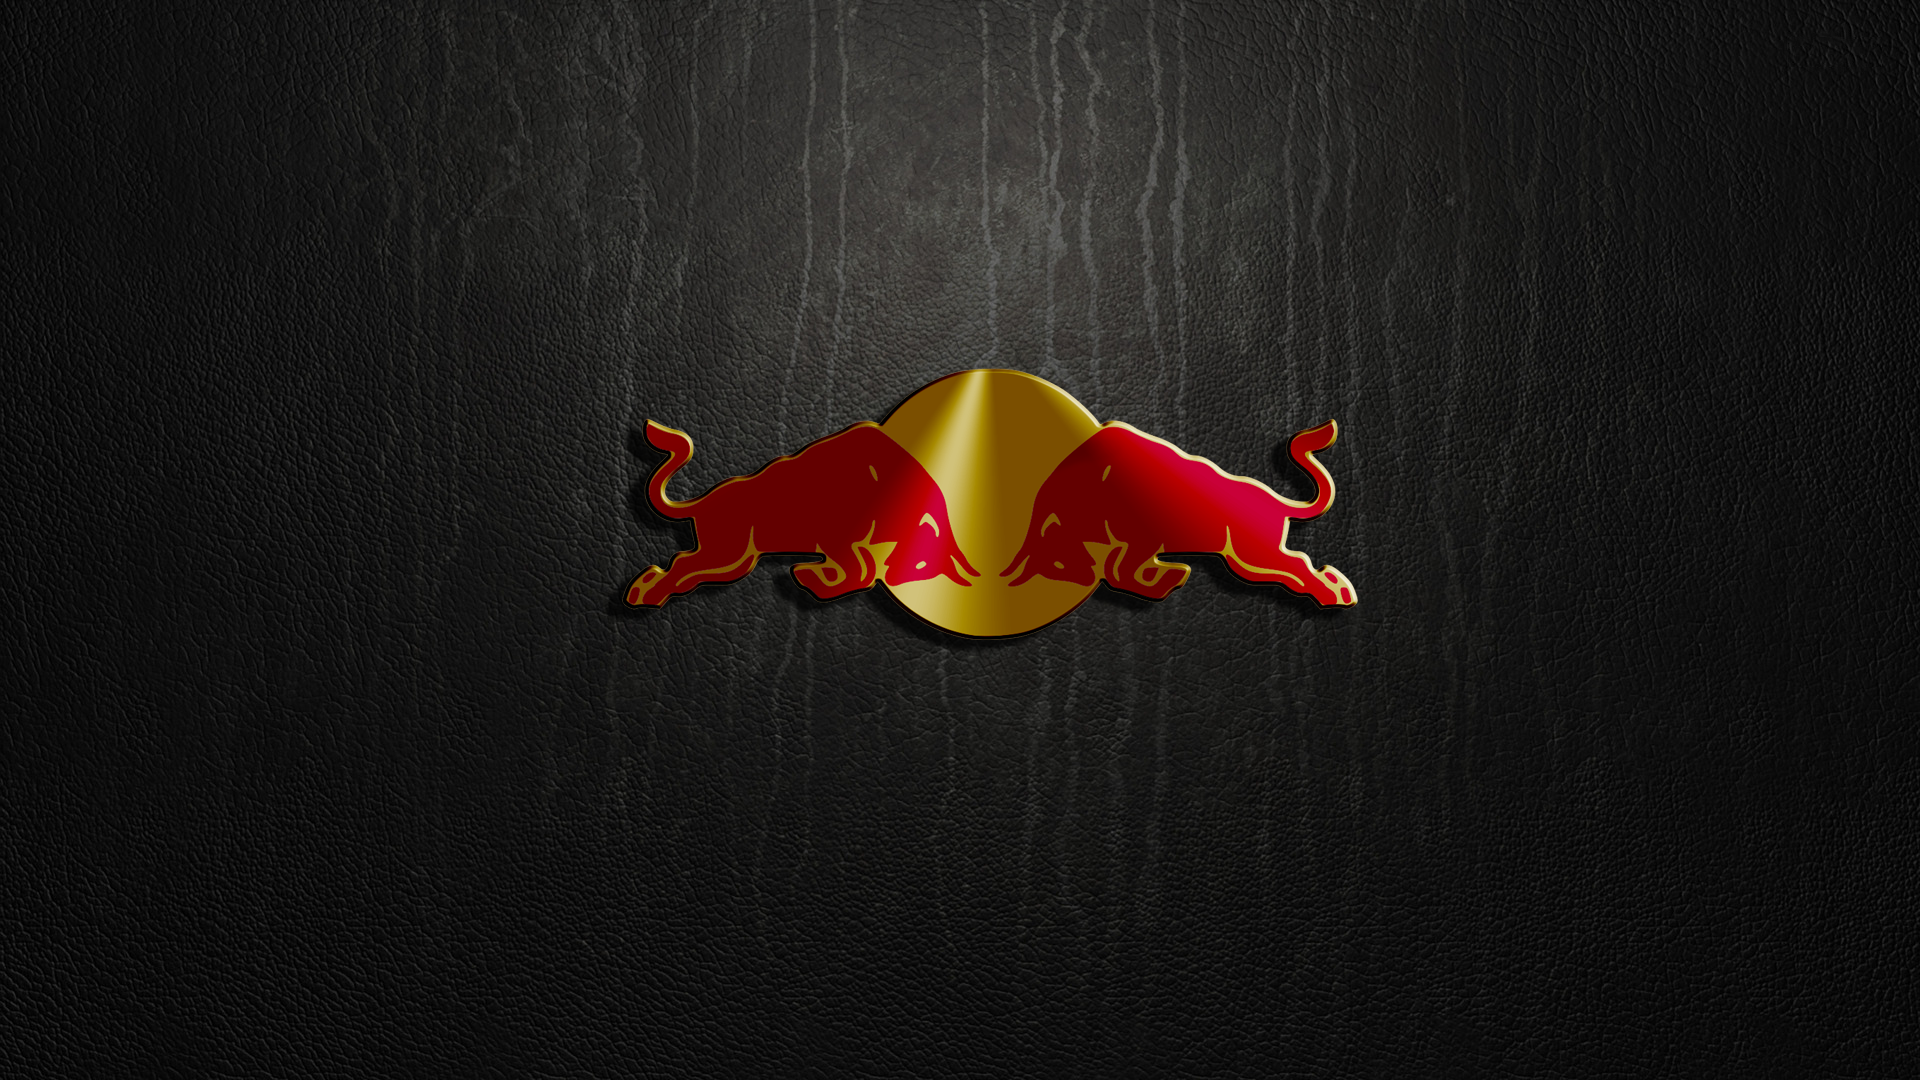 Red Bull Logo Leather Texture Q Wallpaper Background